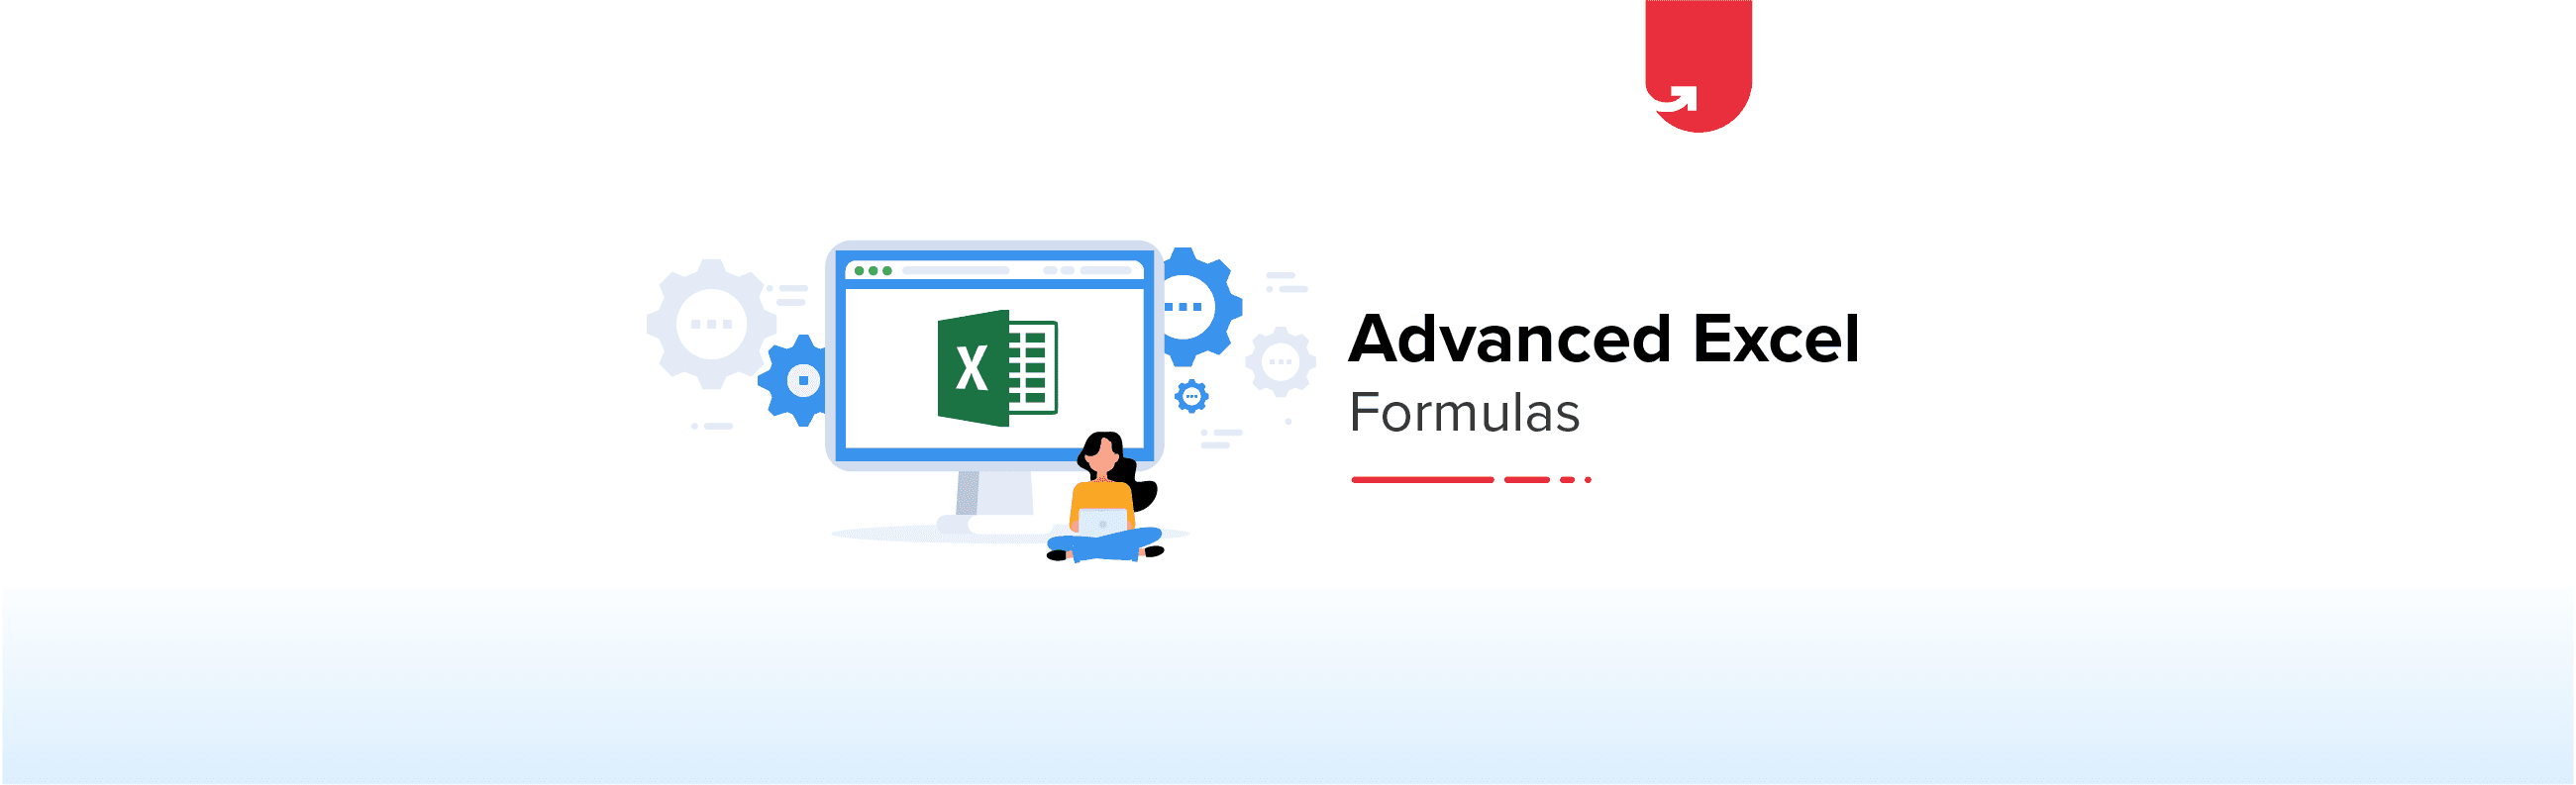 25 Advanced Excel Formulas &#8211; A Must Know For All Professionals